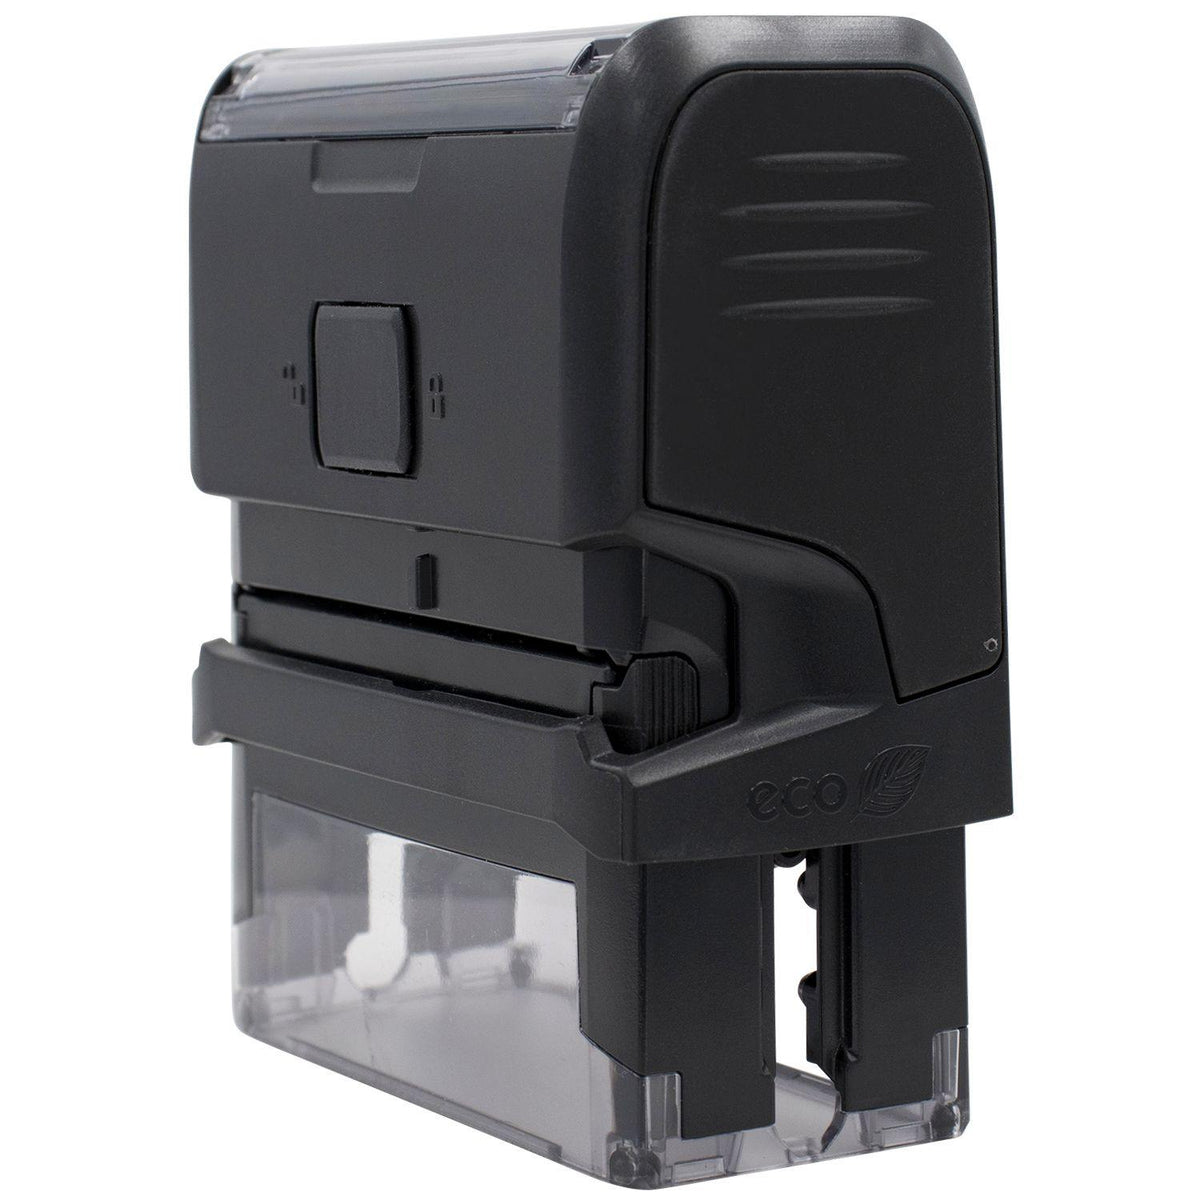 Self-Inking Essential Job Stamp - Engineer Seal Stamps - Brand_Trodat, Impression Size_Small, Stamp Type_Self-Inking Stamp, Type of Use_Business, Type of Use_General, Type of Use_Medical Office